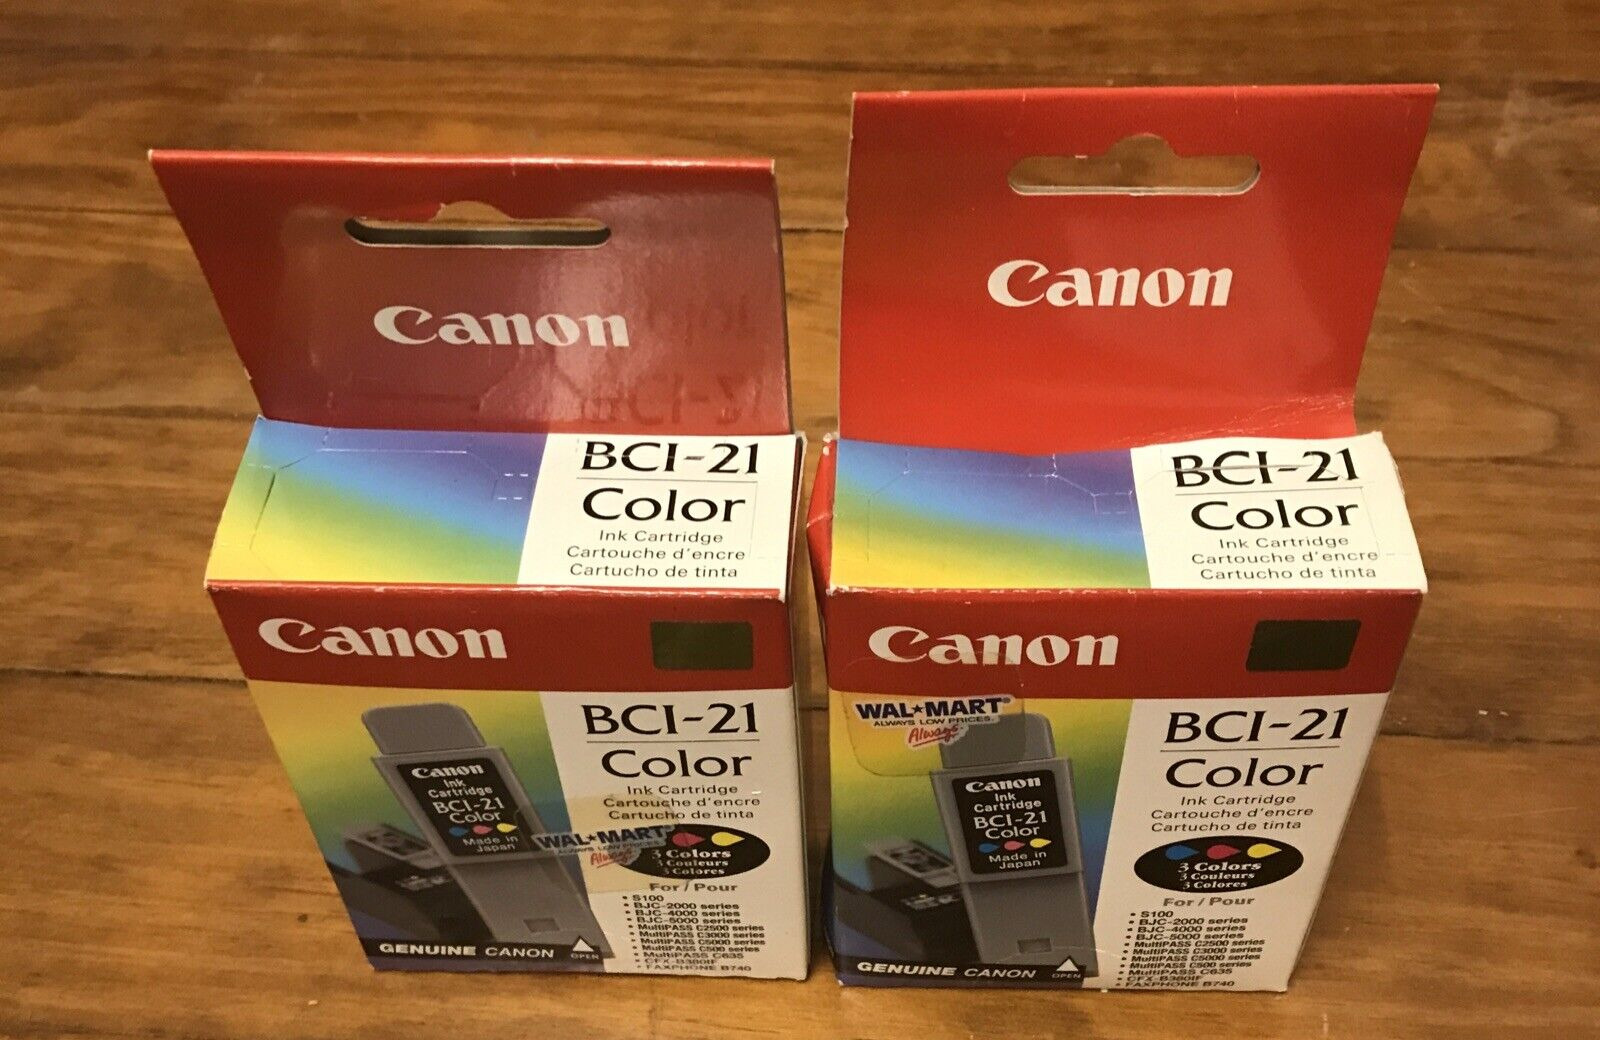 NEW NOS Lot of 2 Genuine CANON BCI-21 COLOR Ink Cartridges EXPIRED